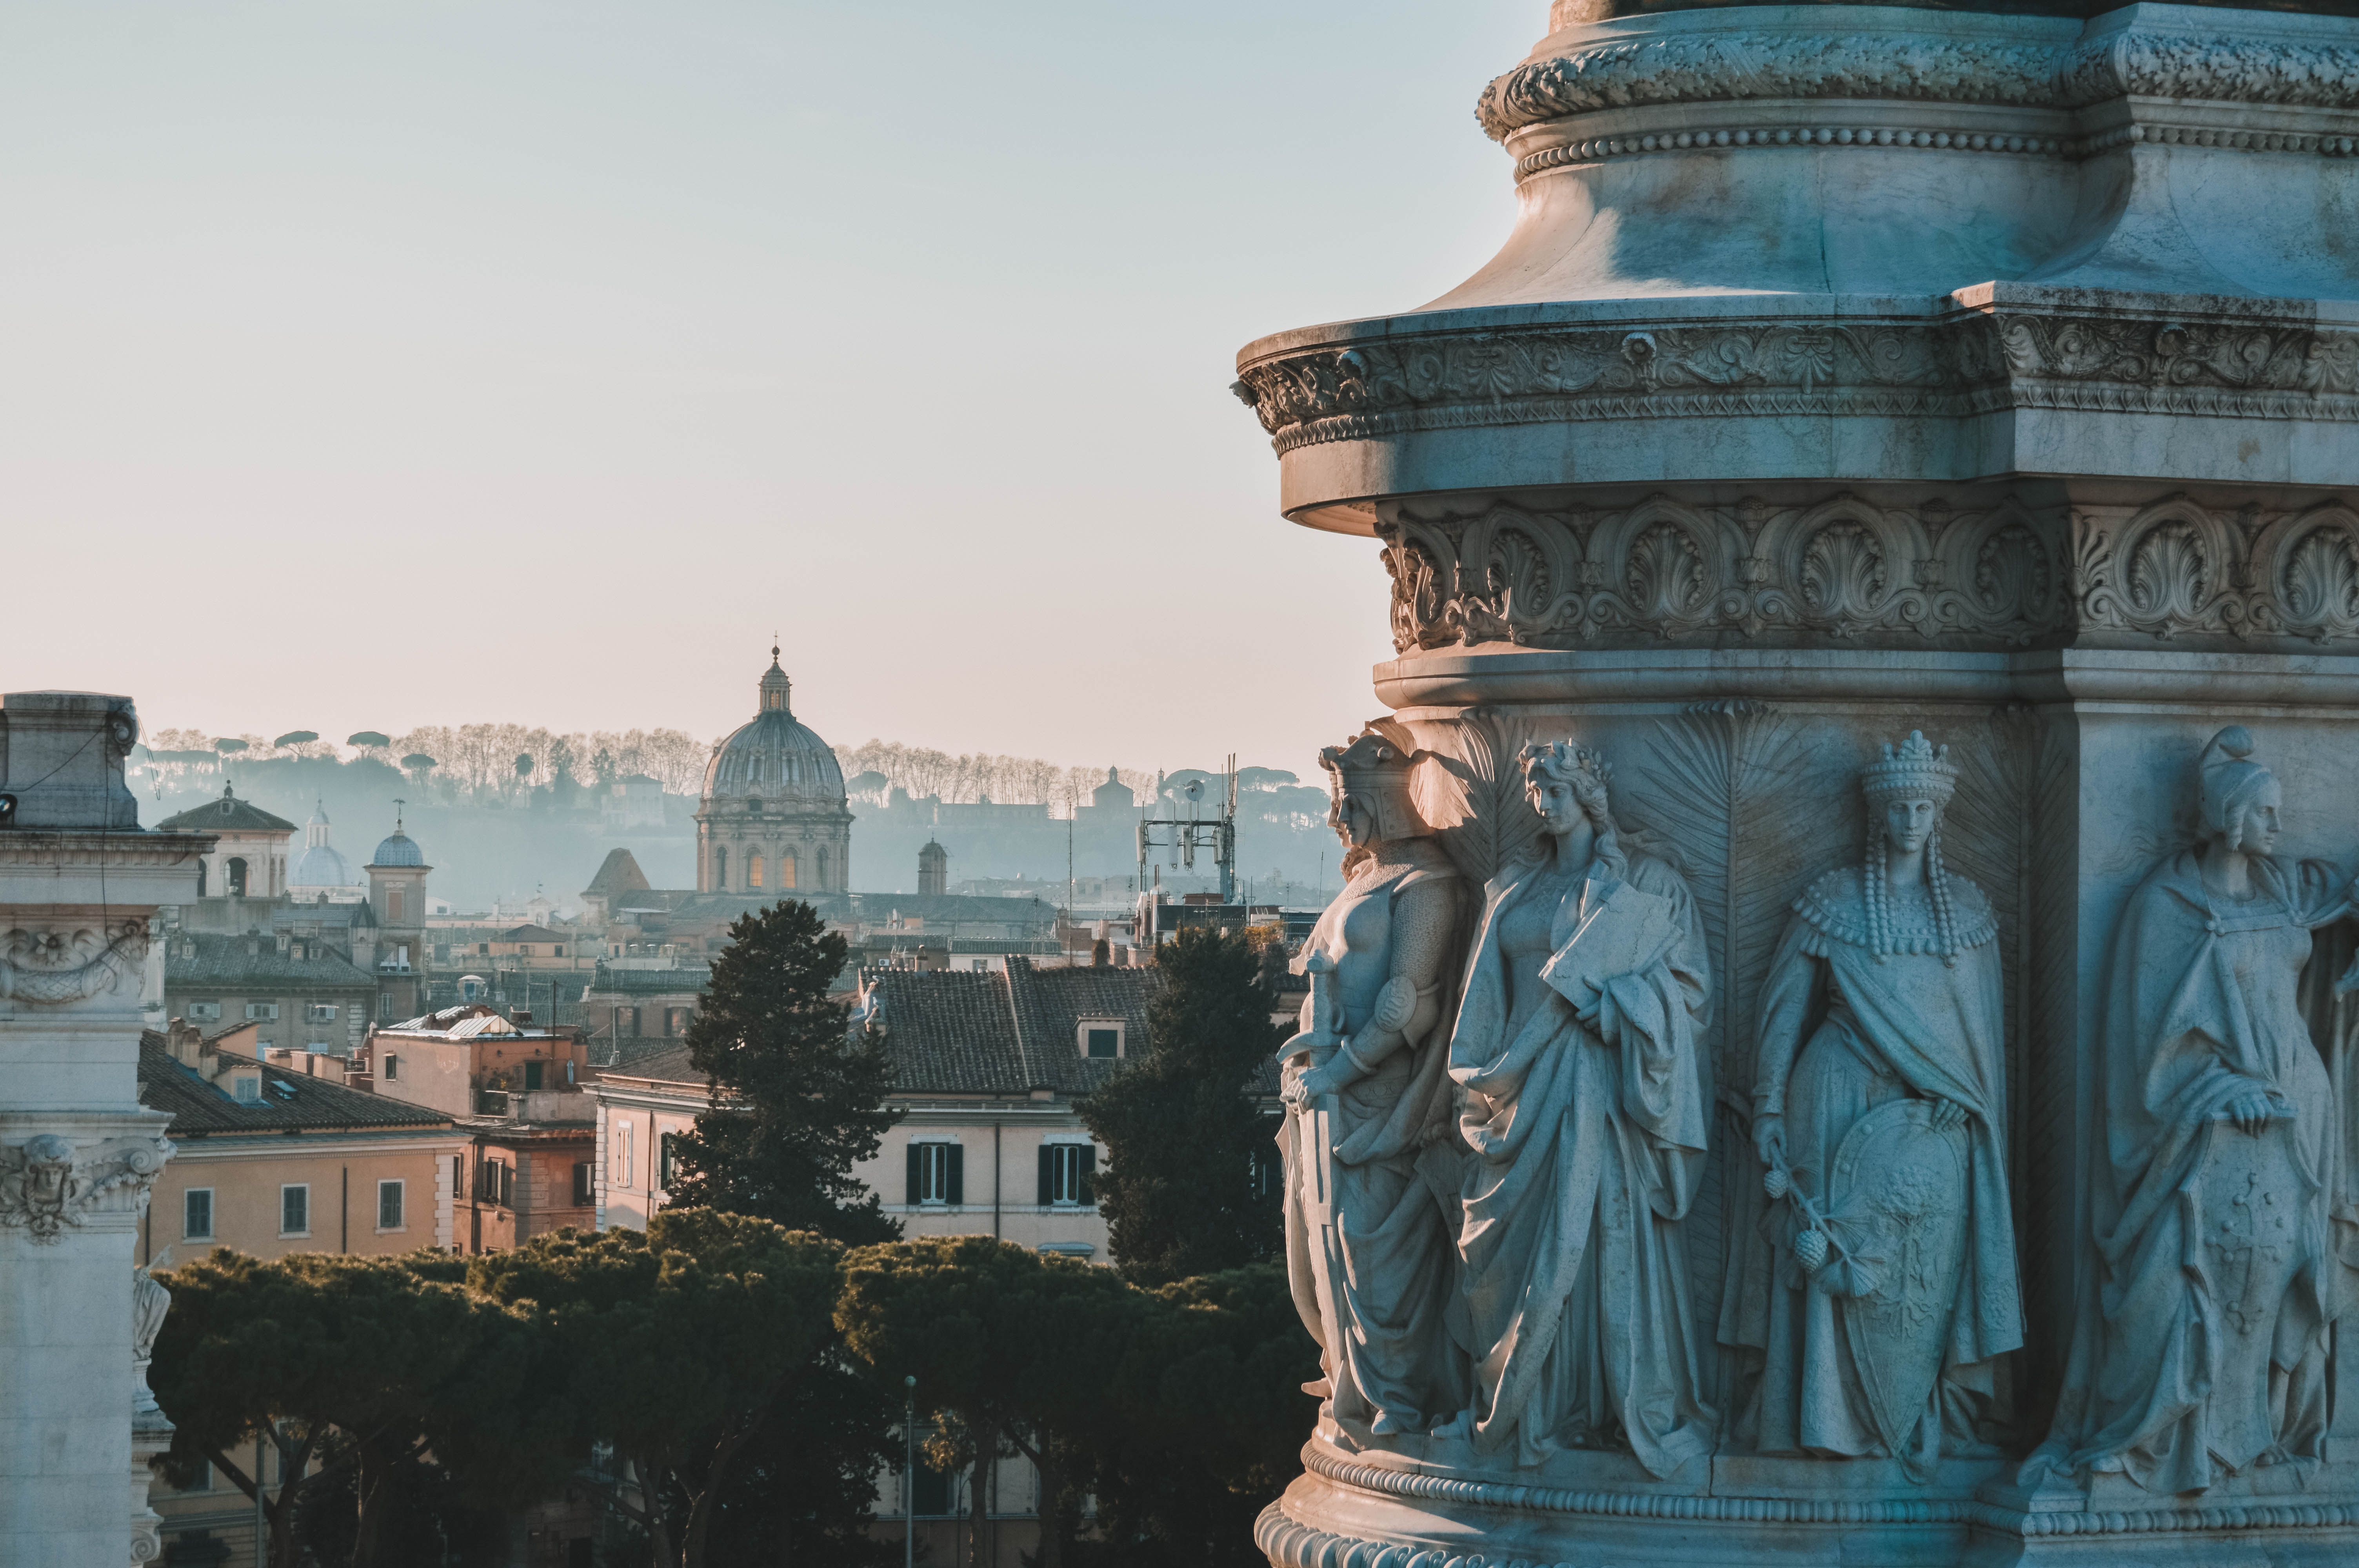 10 Things to Do and Avoid in Rome